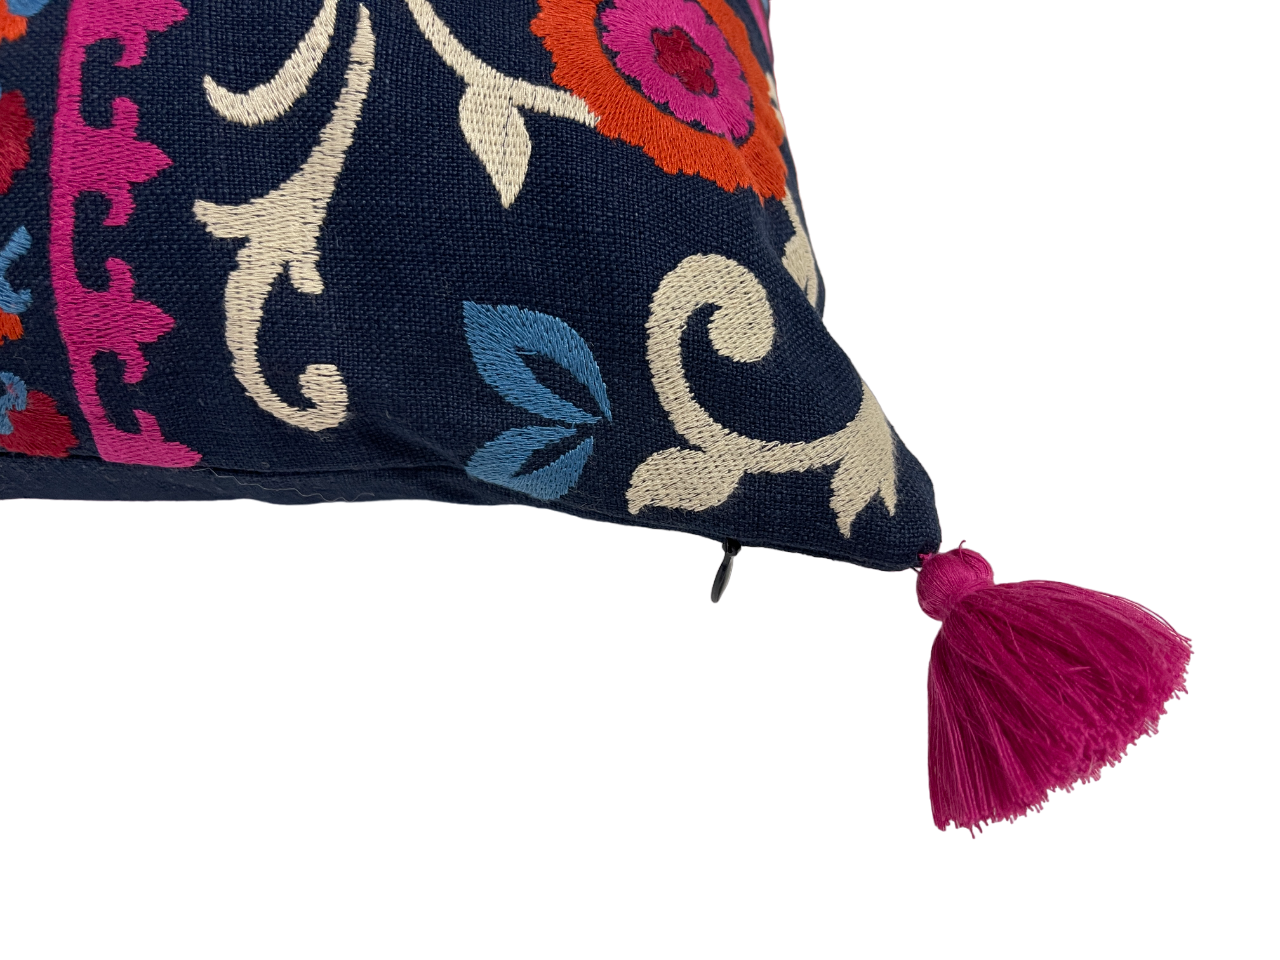 Tashkent Suzani Embroidered Midnight Blue Cushion Cover with Tassels